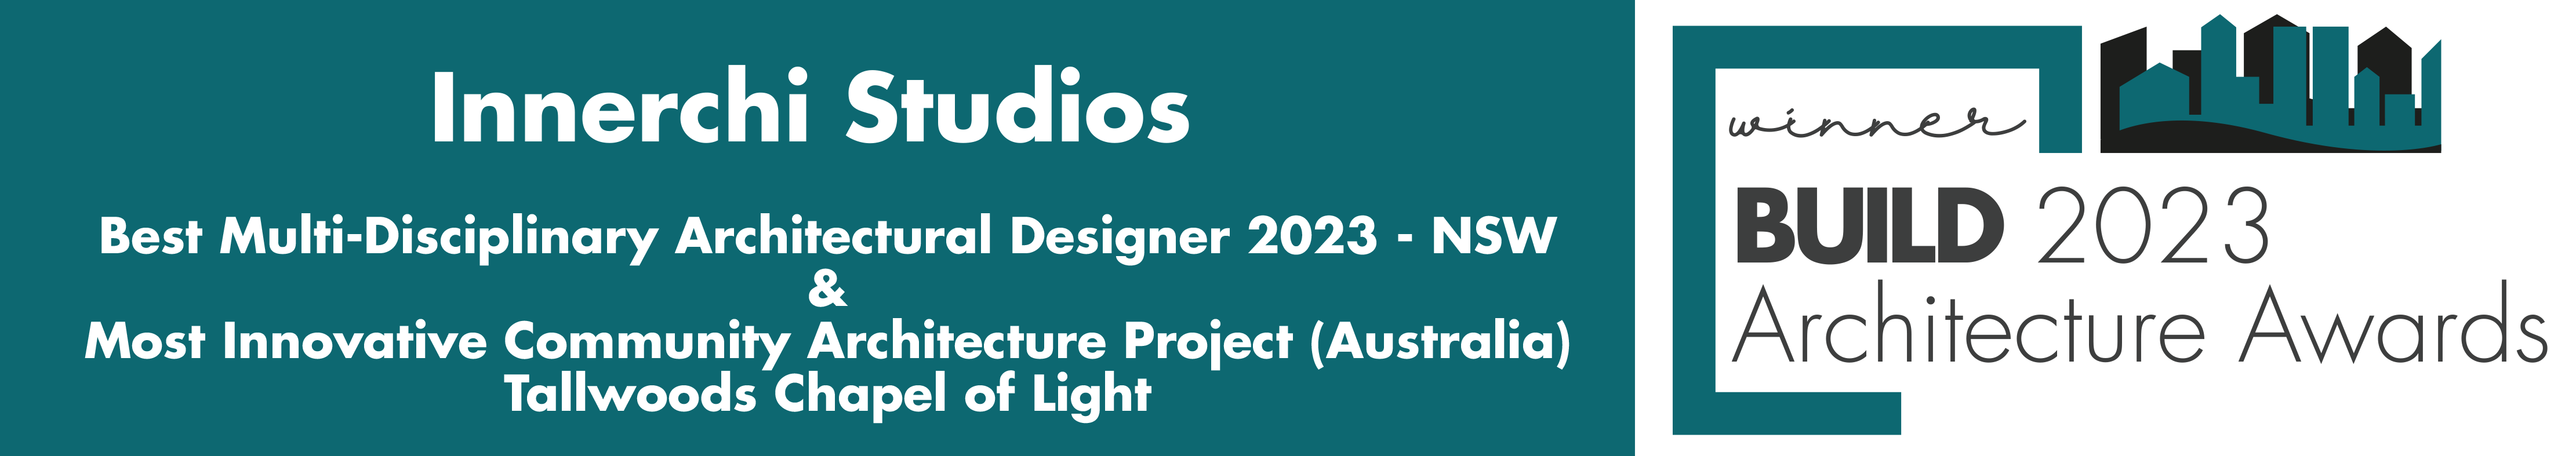 Build 2023 Architecture Awards,
Best Multi-Disciplinary Architectural Designer & Most Innovative Community Architecture Project (Australia) - Tallwoods Chapel of Light.